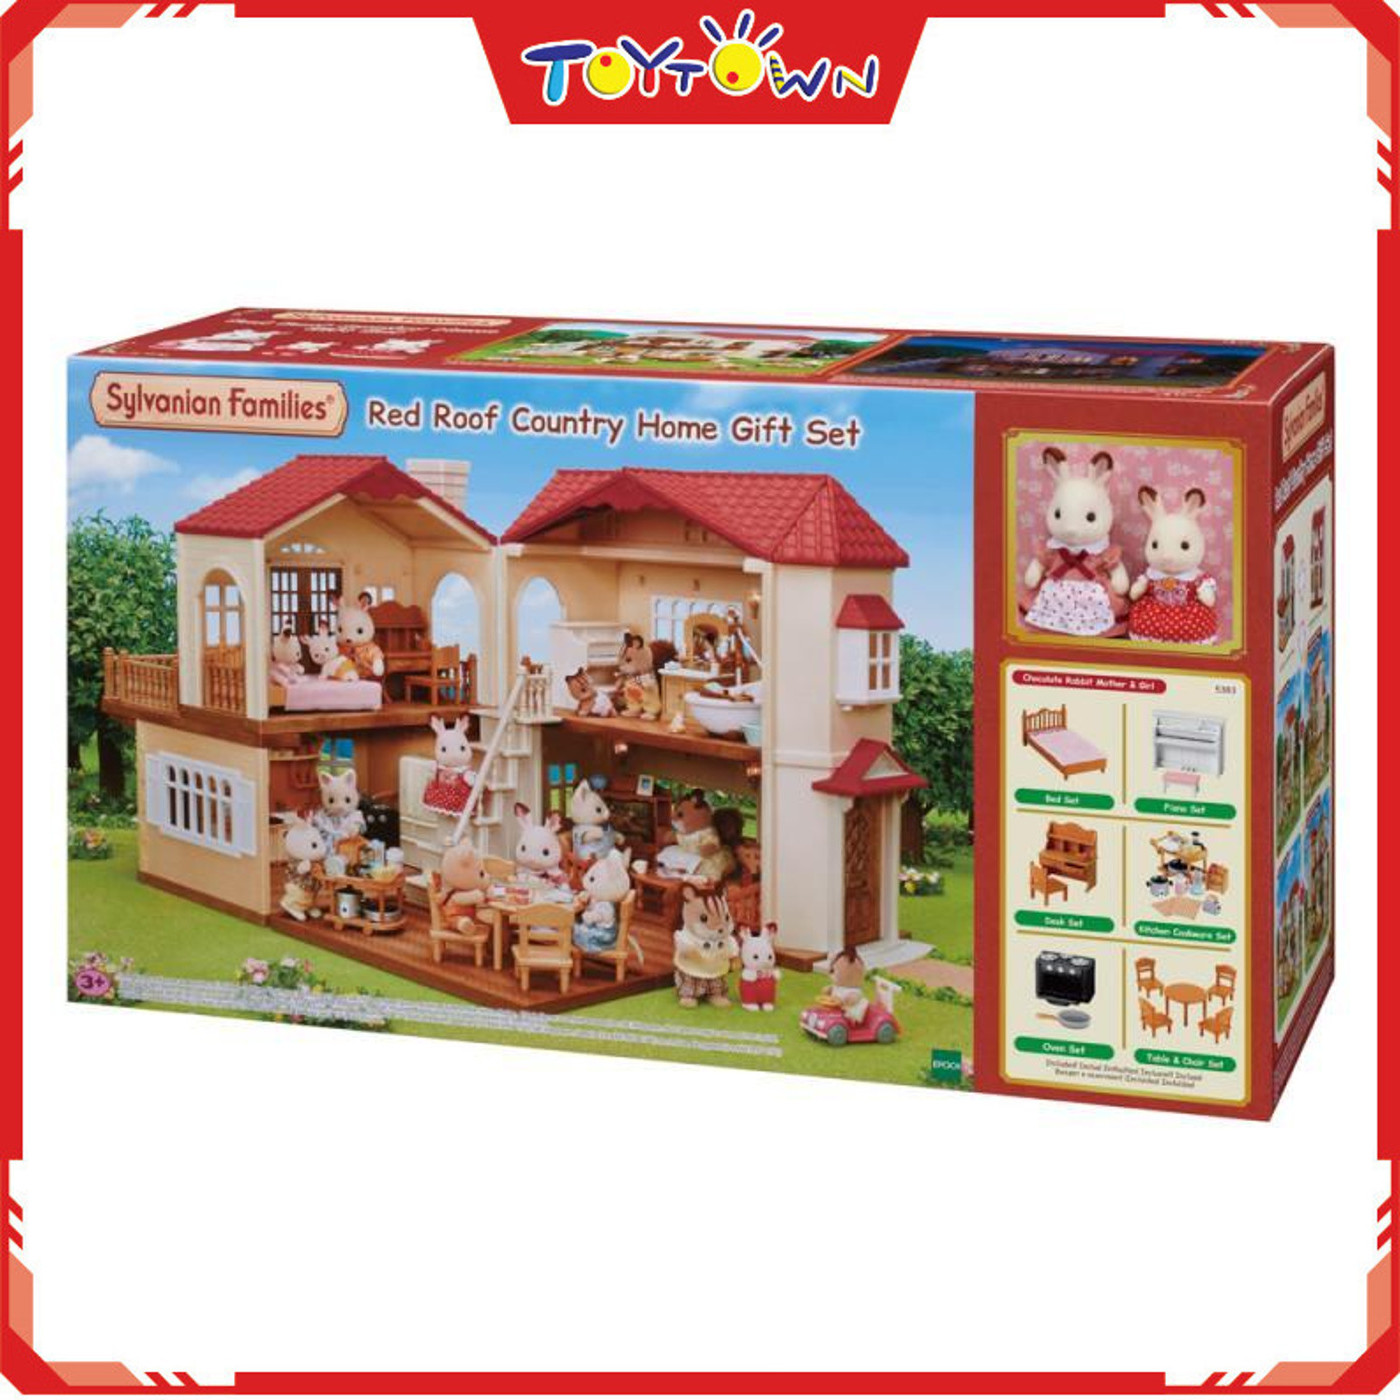 Sylvanian Families Calico Critters Classic Brown Kitchen Stove & Sink Set for sale online